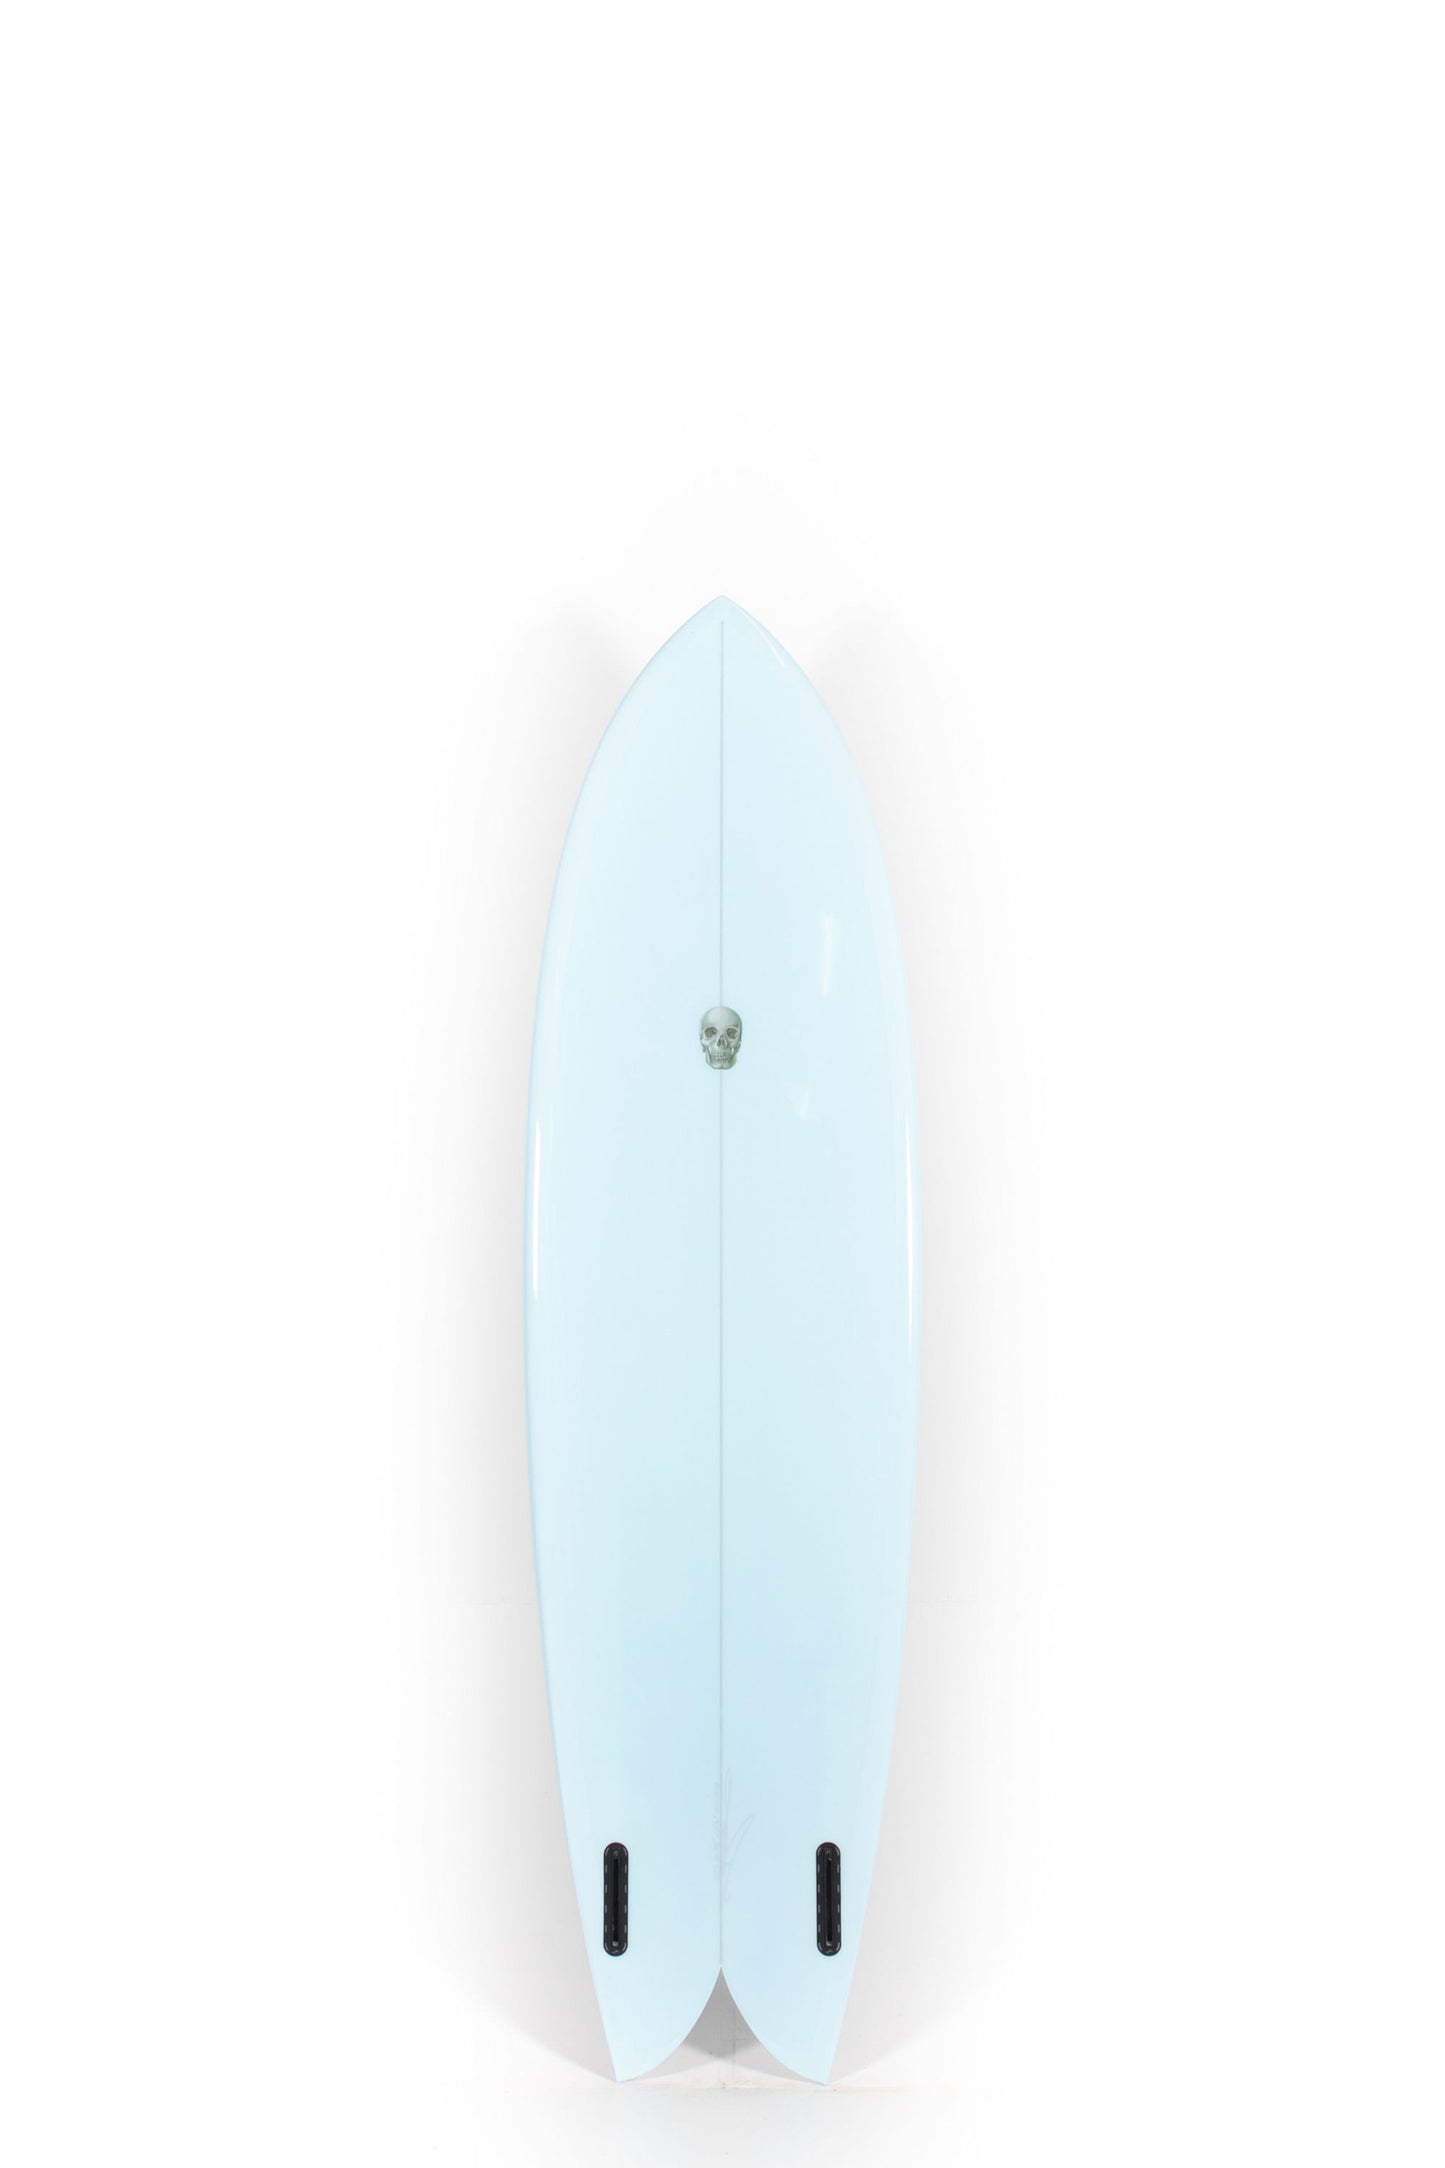 Fashion Surfboard France IV Solid-Faced Canvas Print